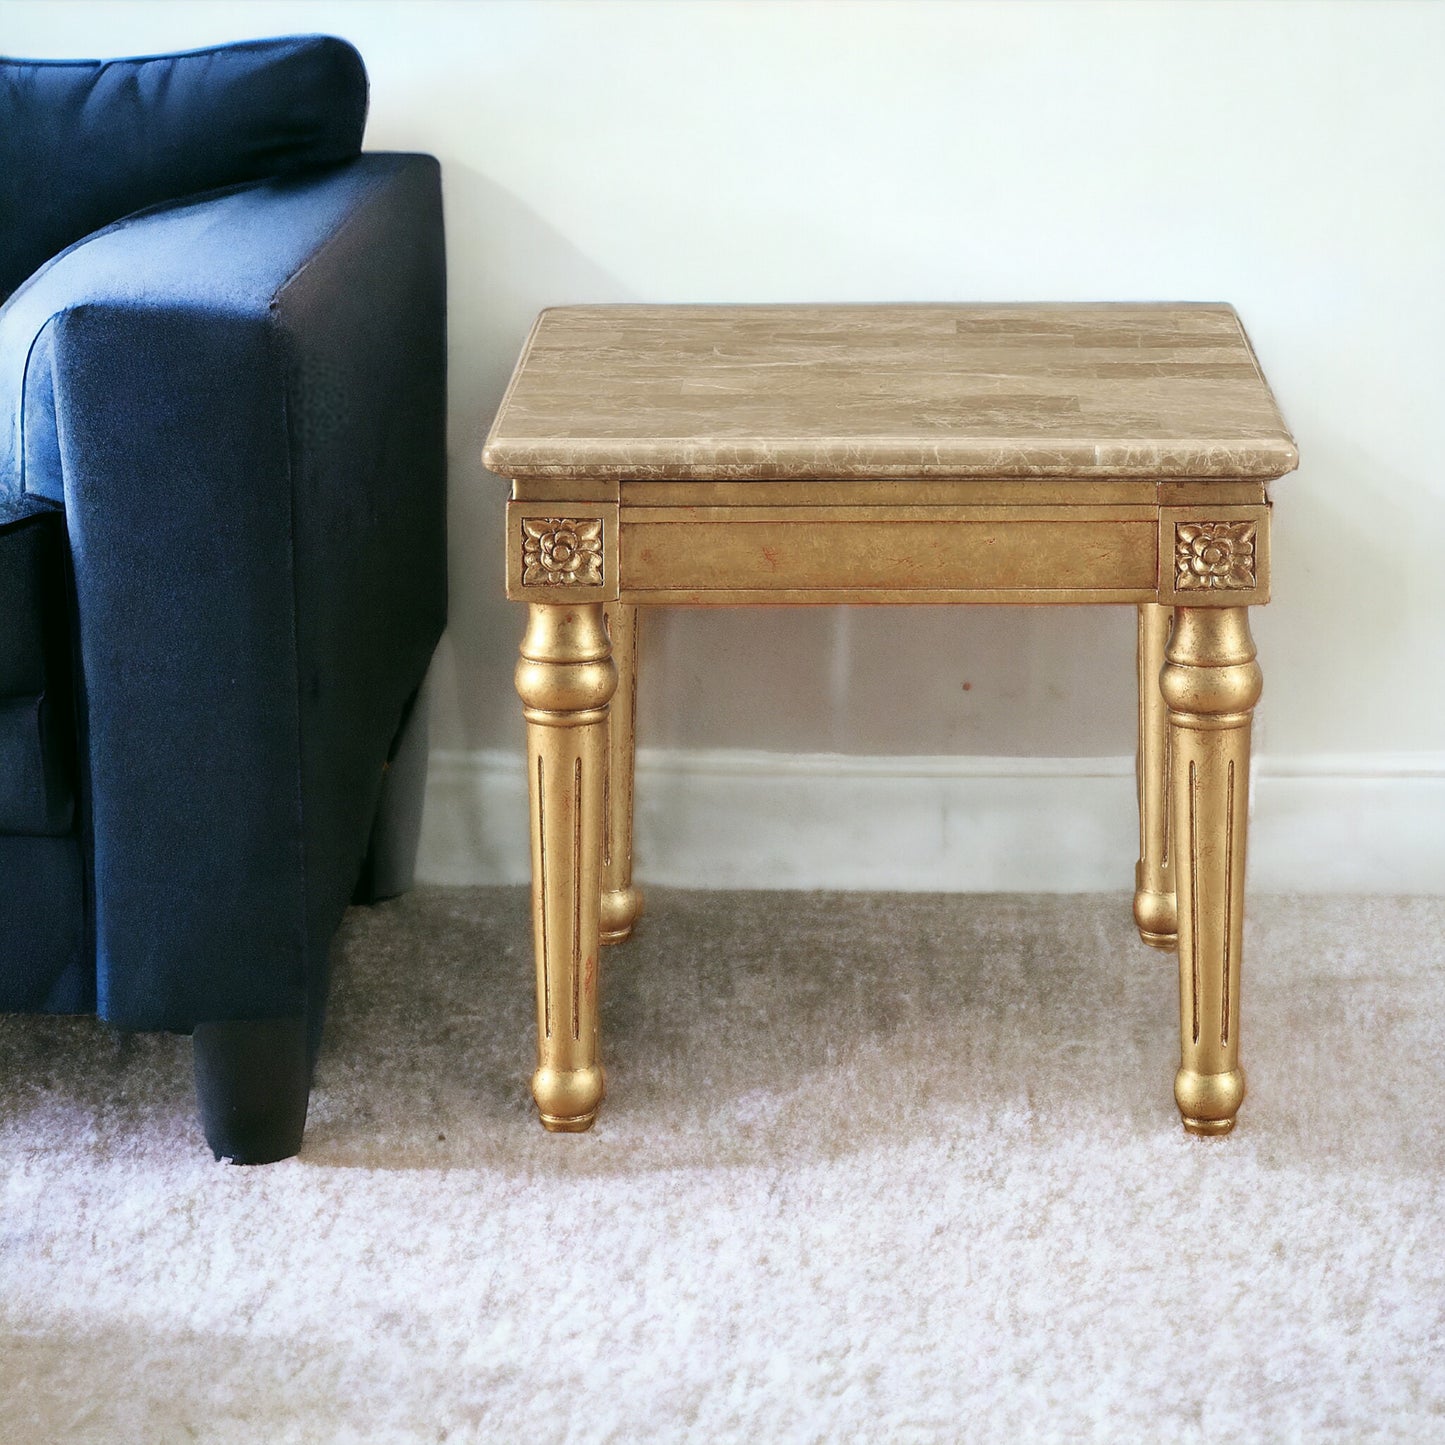 24" Antique Gold And White Faux Marble Square End Table